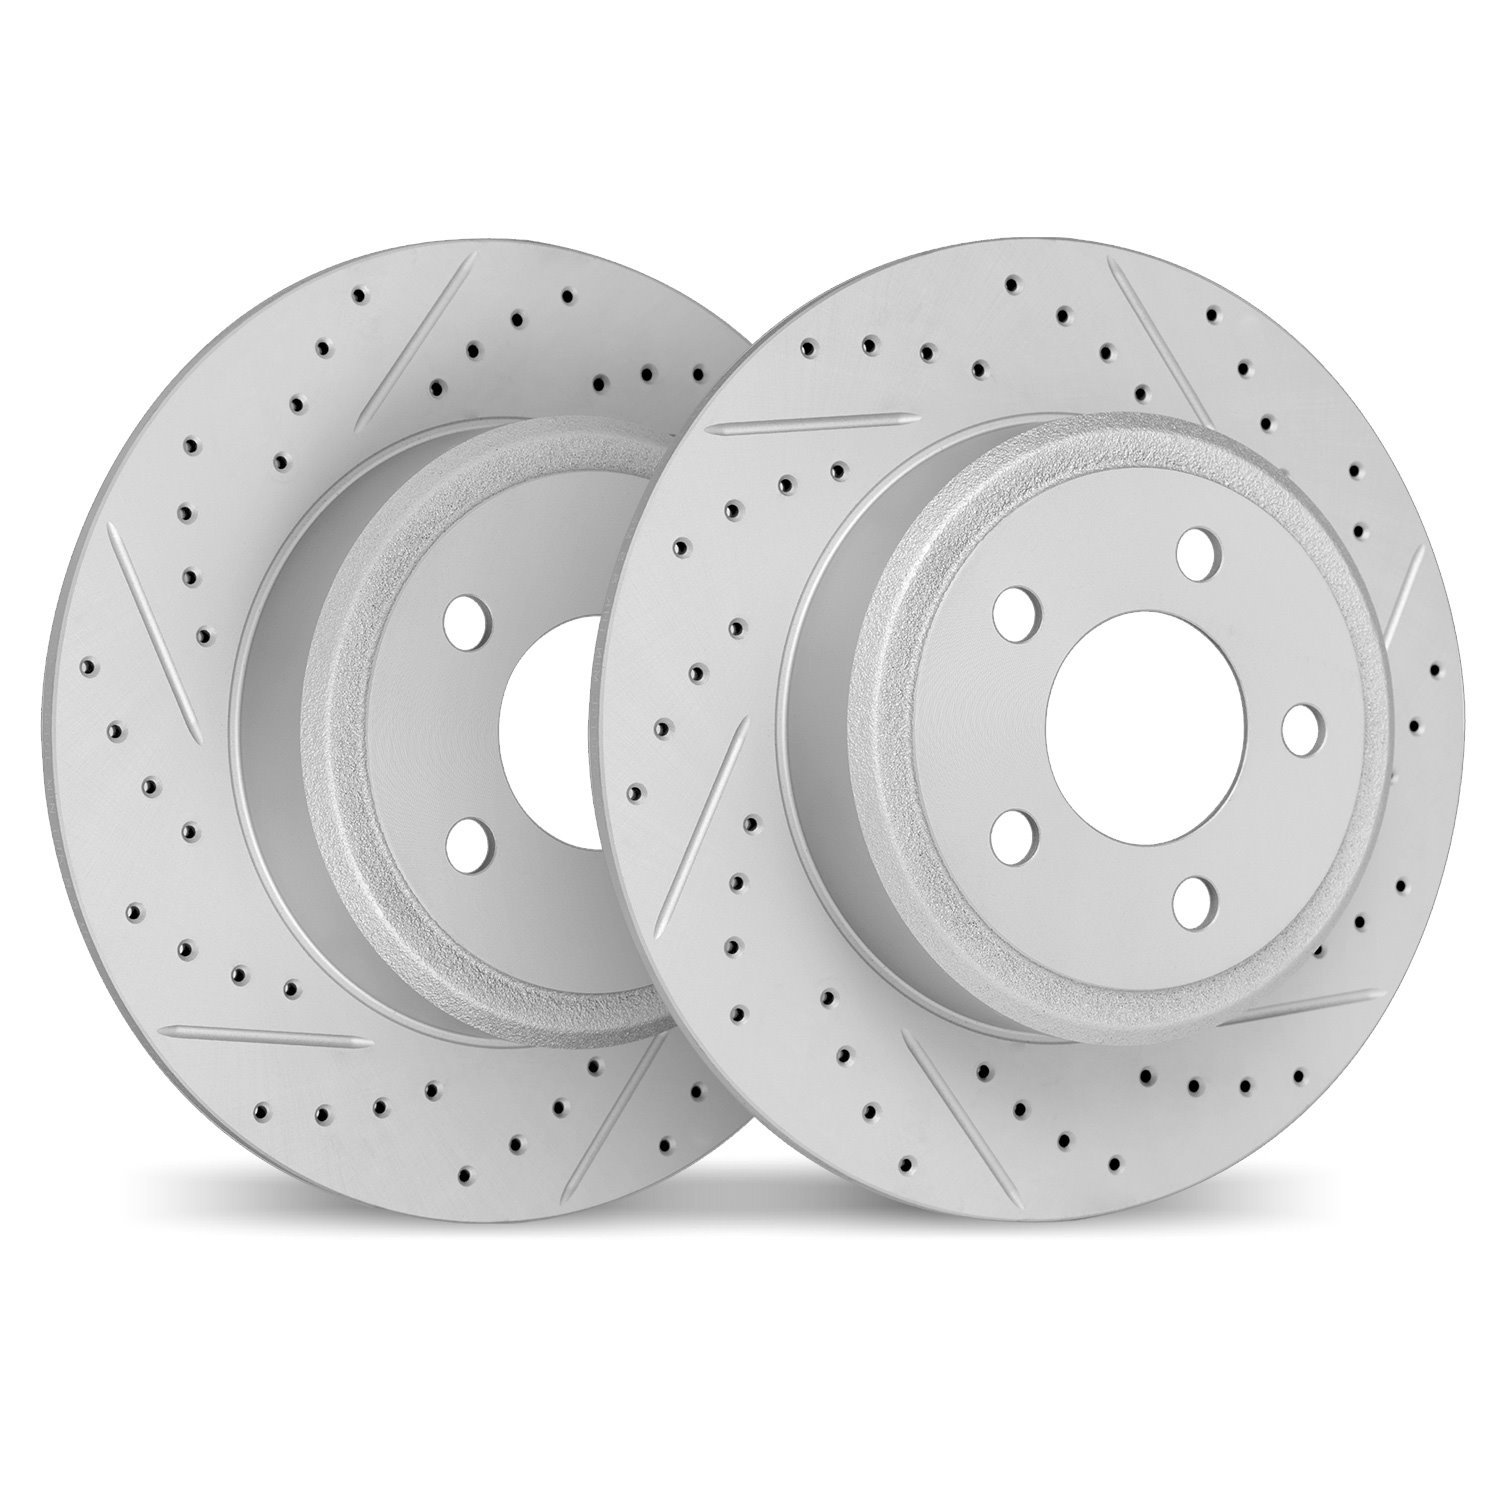 2002-31092 Geoperformance Drilled/Slotted Brake Rotors, 2000-2006 BMW, Position: Rear